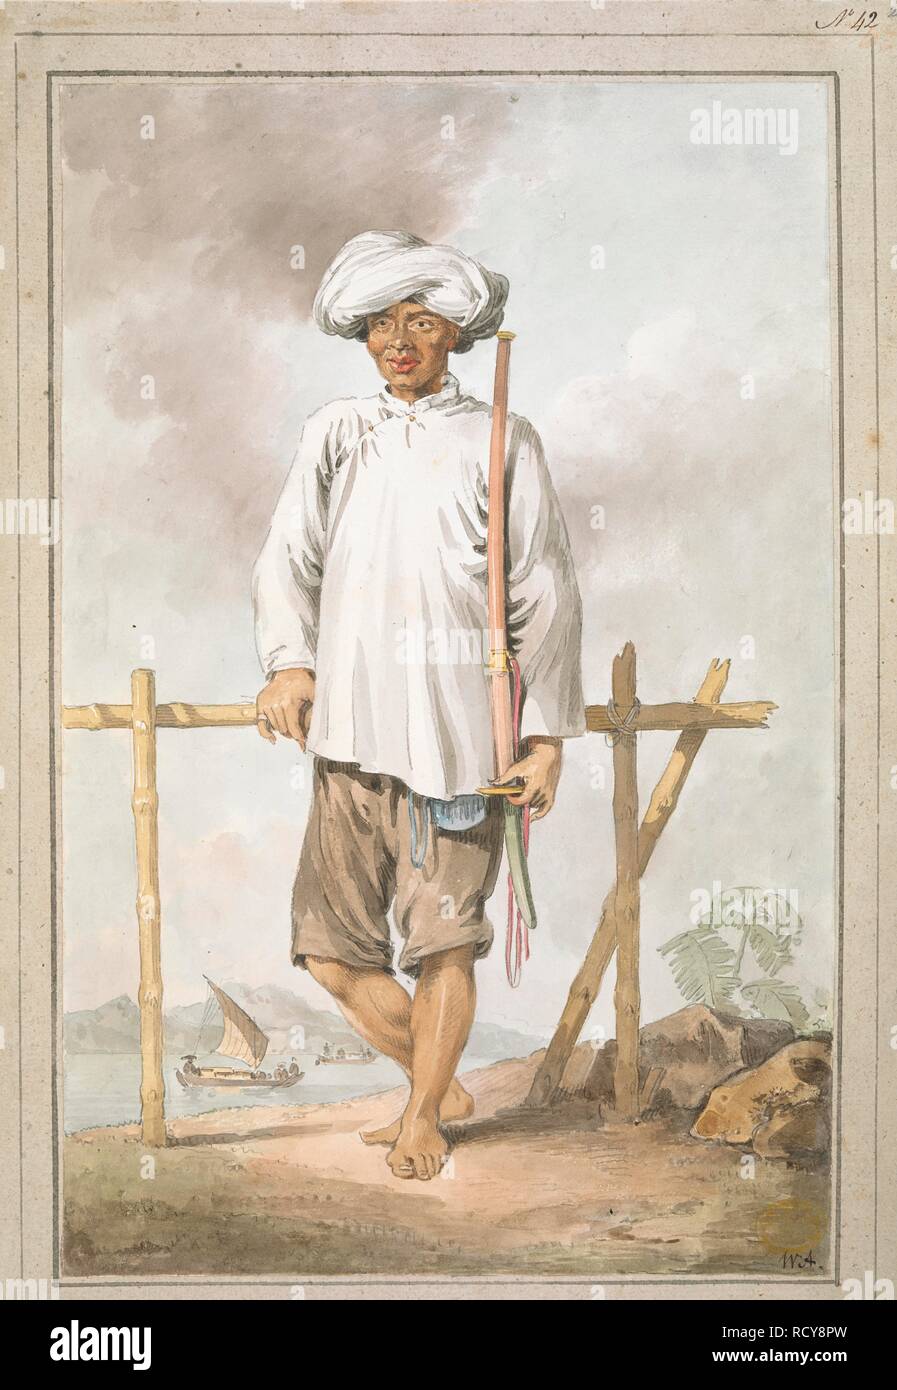 Portrait of Cochin-Chinese soldier. Portrait of a barefoot soldier standing full-length facing front, leaning on a wooden fence and holding a sheathed sword over his shoulder, dressed in knee-length wide trousers, long-sleeved chemise and turban, with sailing ships on river in the background. Signed with initials at bottom right and pasted on mount with washlines.  . [A collection of eighty views, maps, portraits and drawings illustrative of the Embassy sent to China under George, Earl of Macartney, in 1793; drawn chiefly by William Alexander, some by Sir John Barrow, Bart., some by Sir Henry  Stock Photo